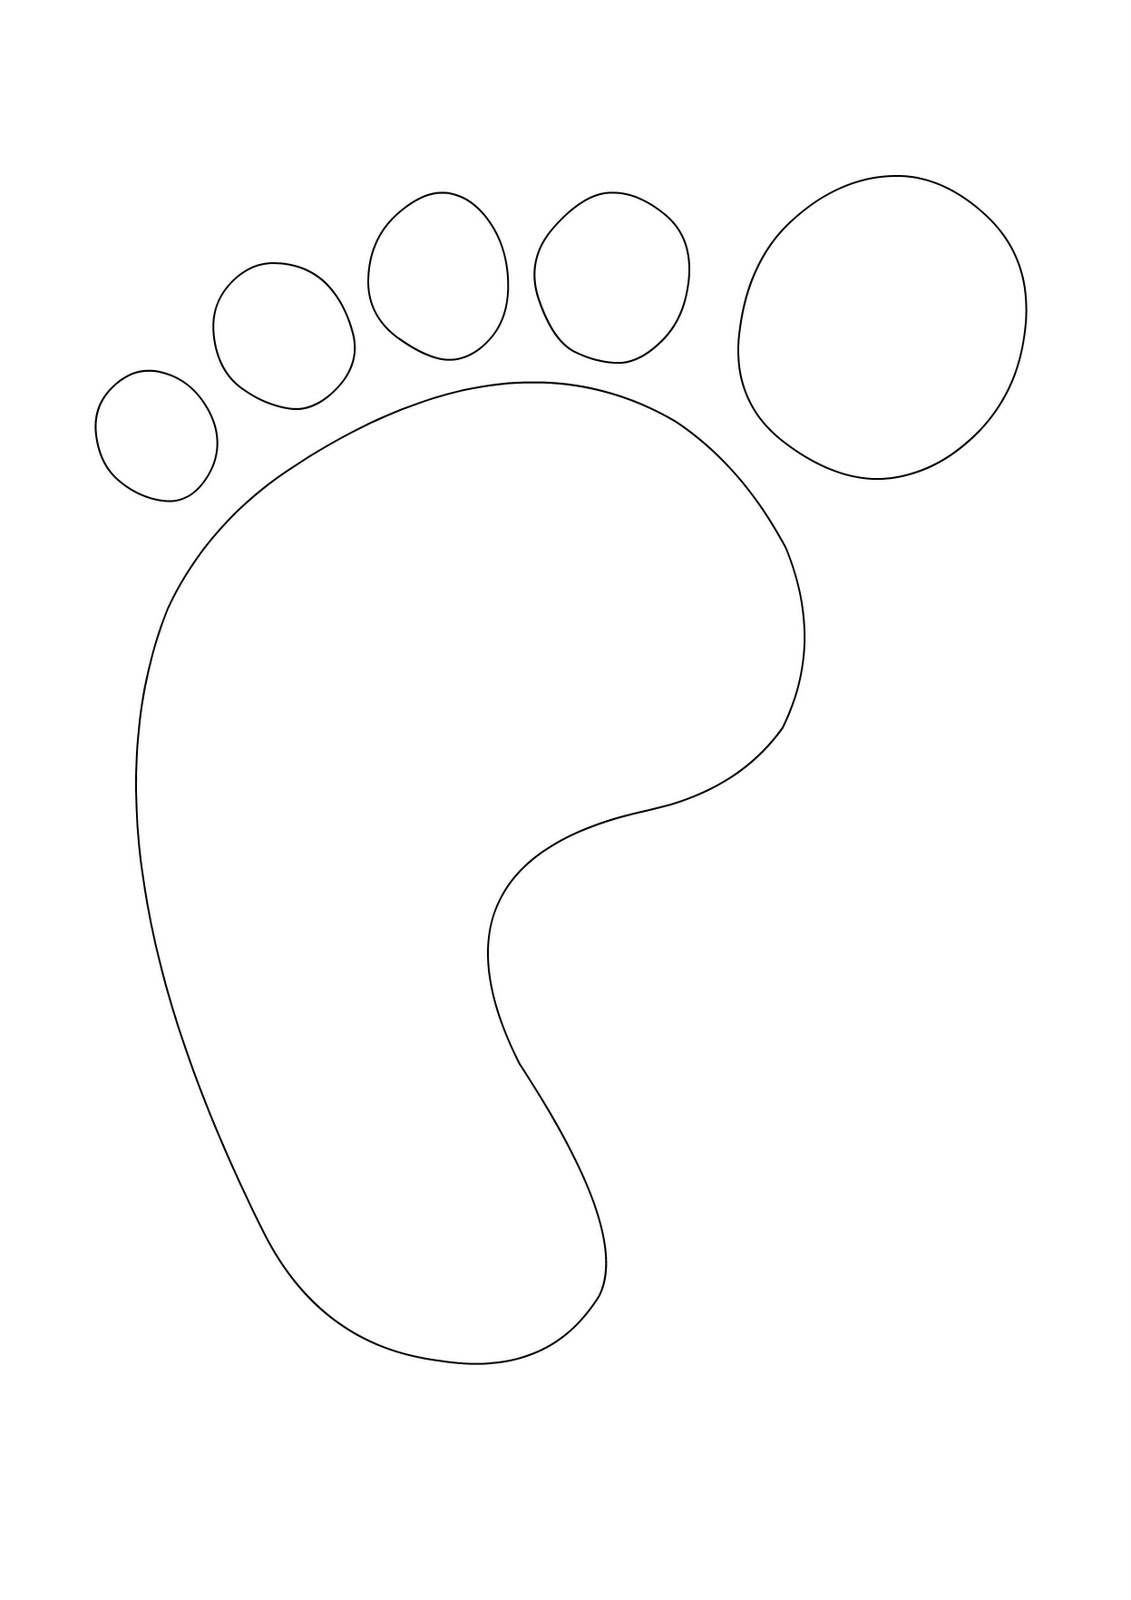 Best Photos of Baby Footprint Coloring Pages - Free Coloring Pages ...